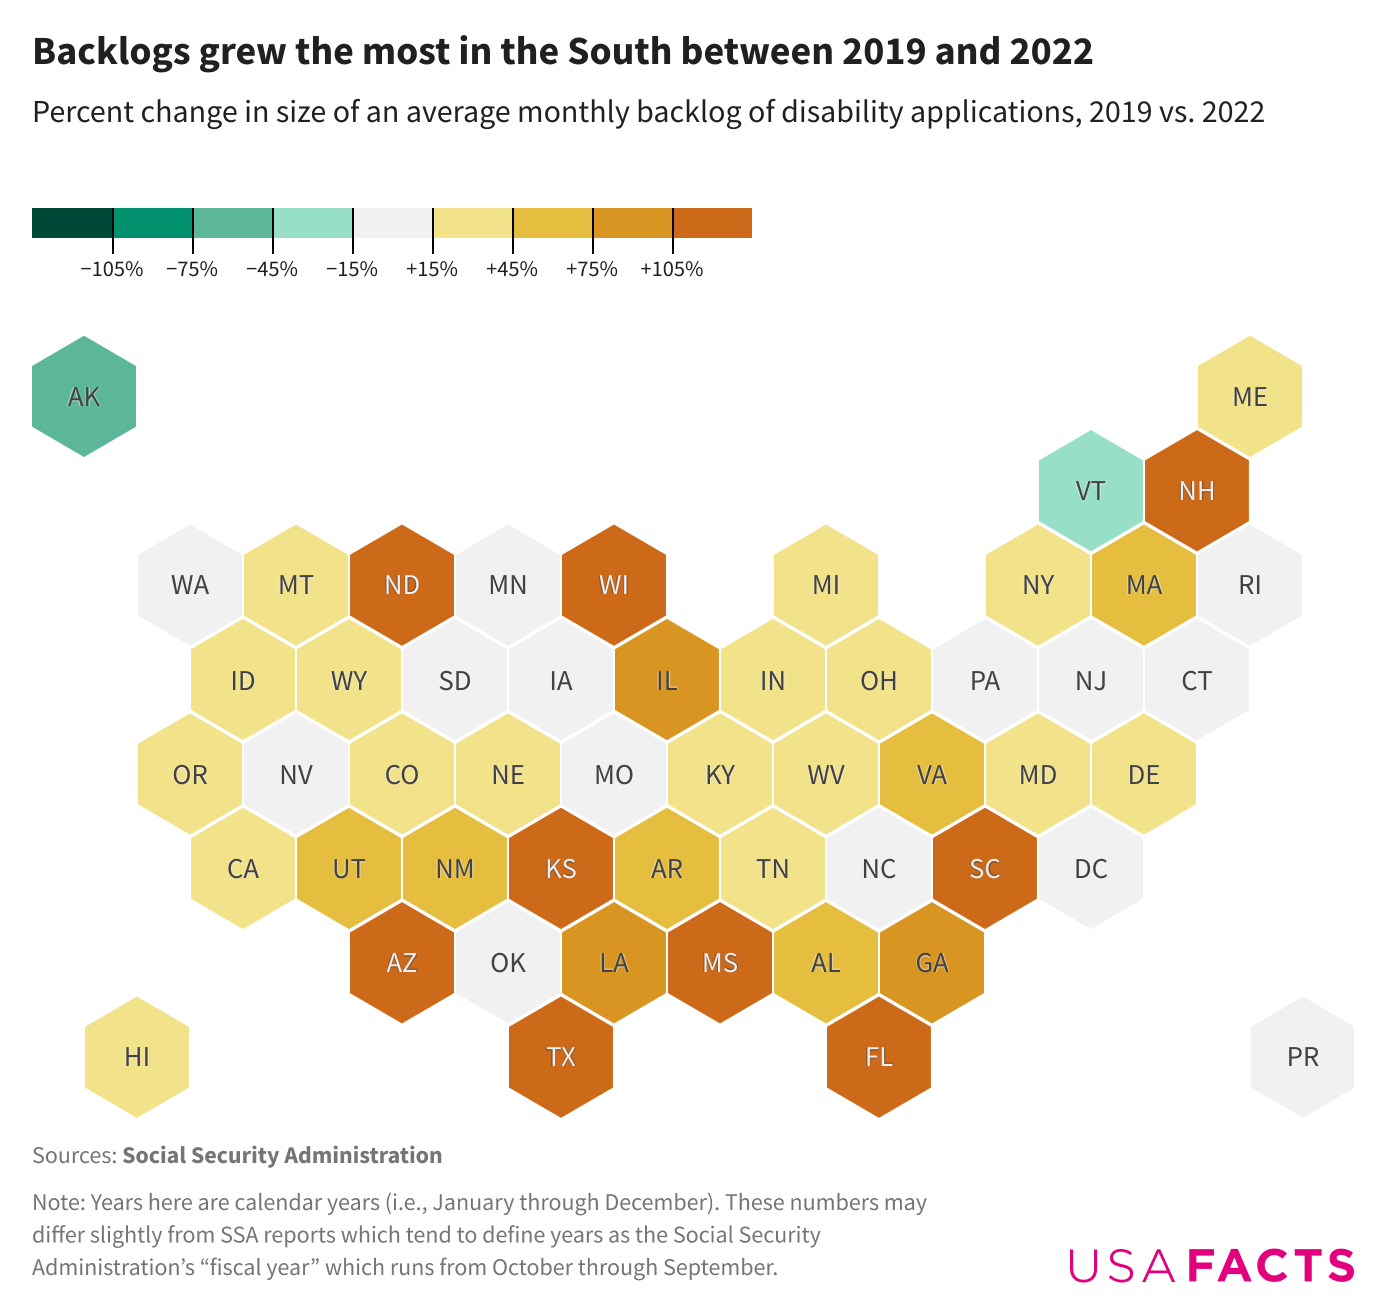 Map of the US comparing the change in disability application backlog size Navigate between states using arrow keys.